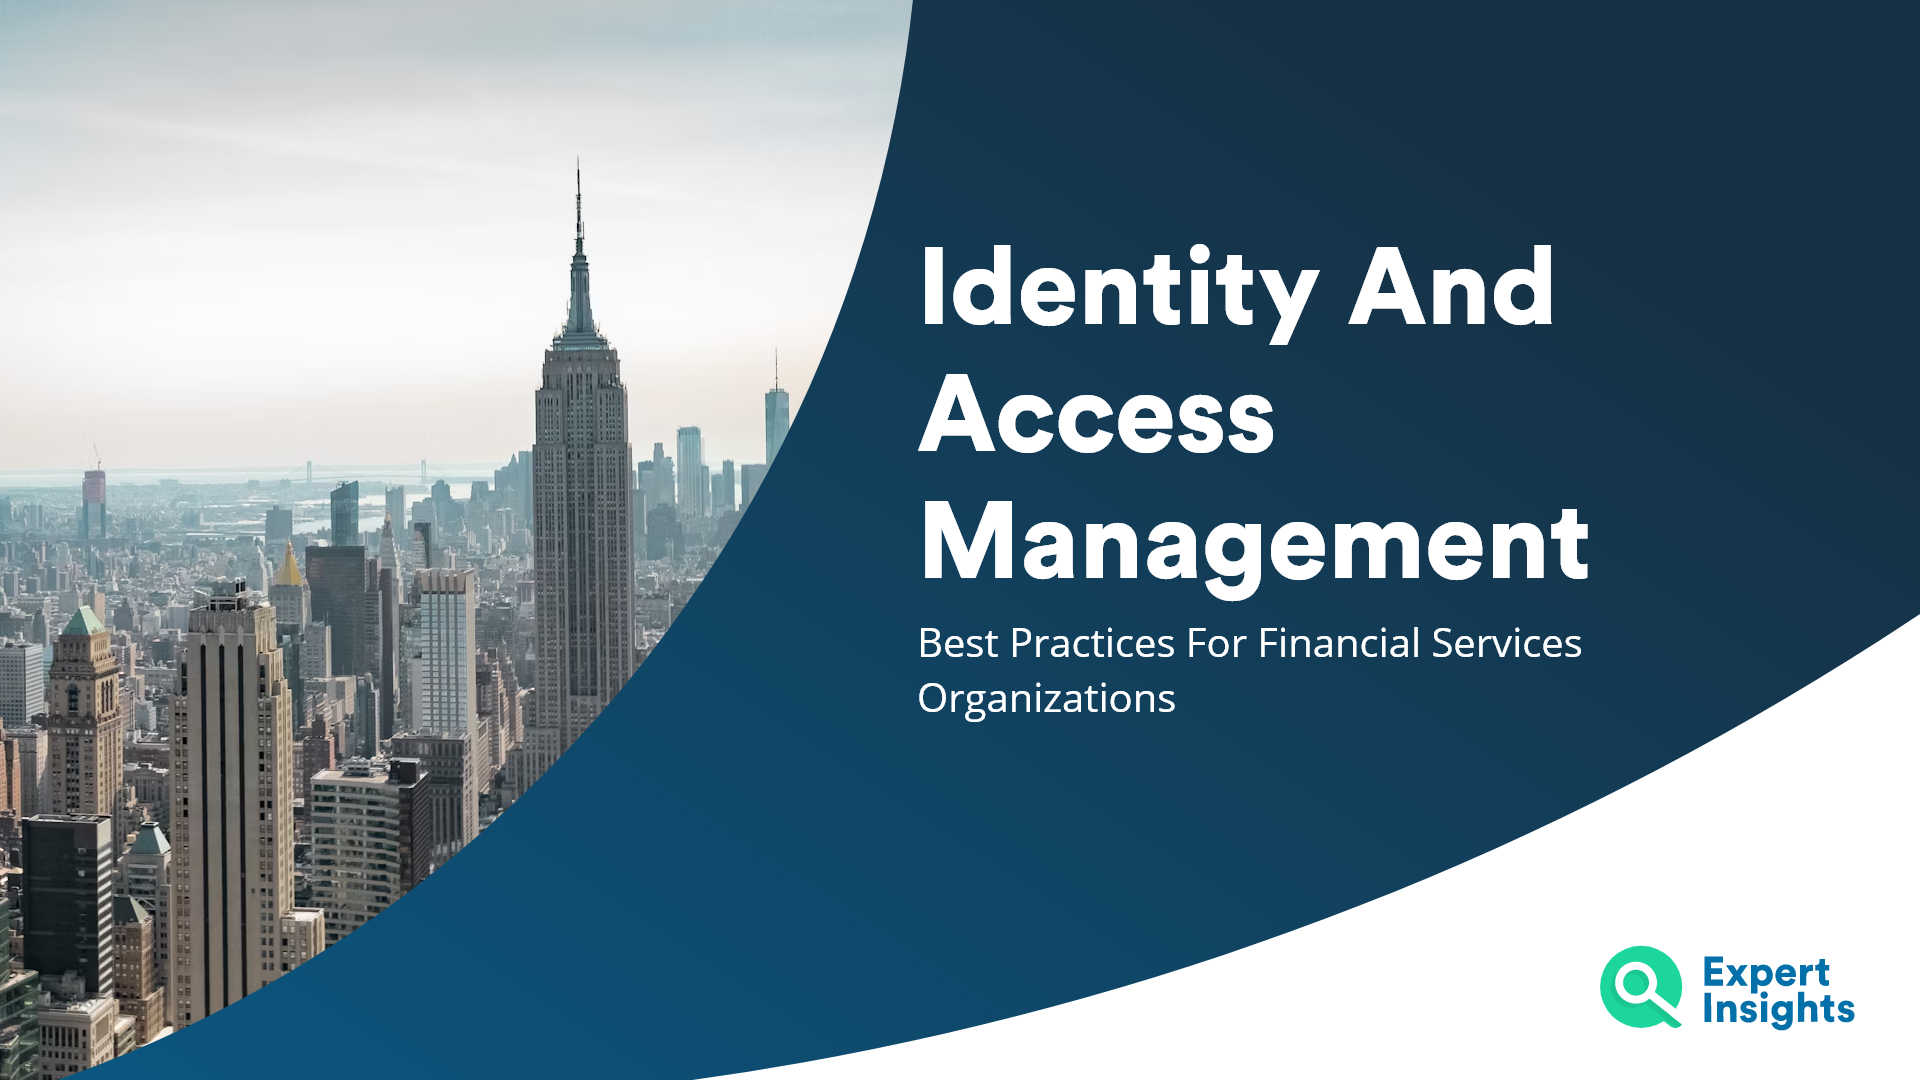 IAM Best Practices For Financial Services Organizations - Expert Insights